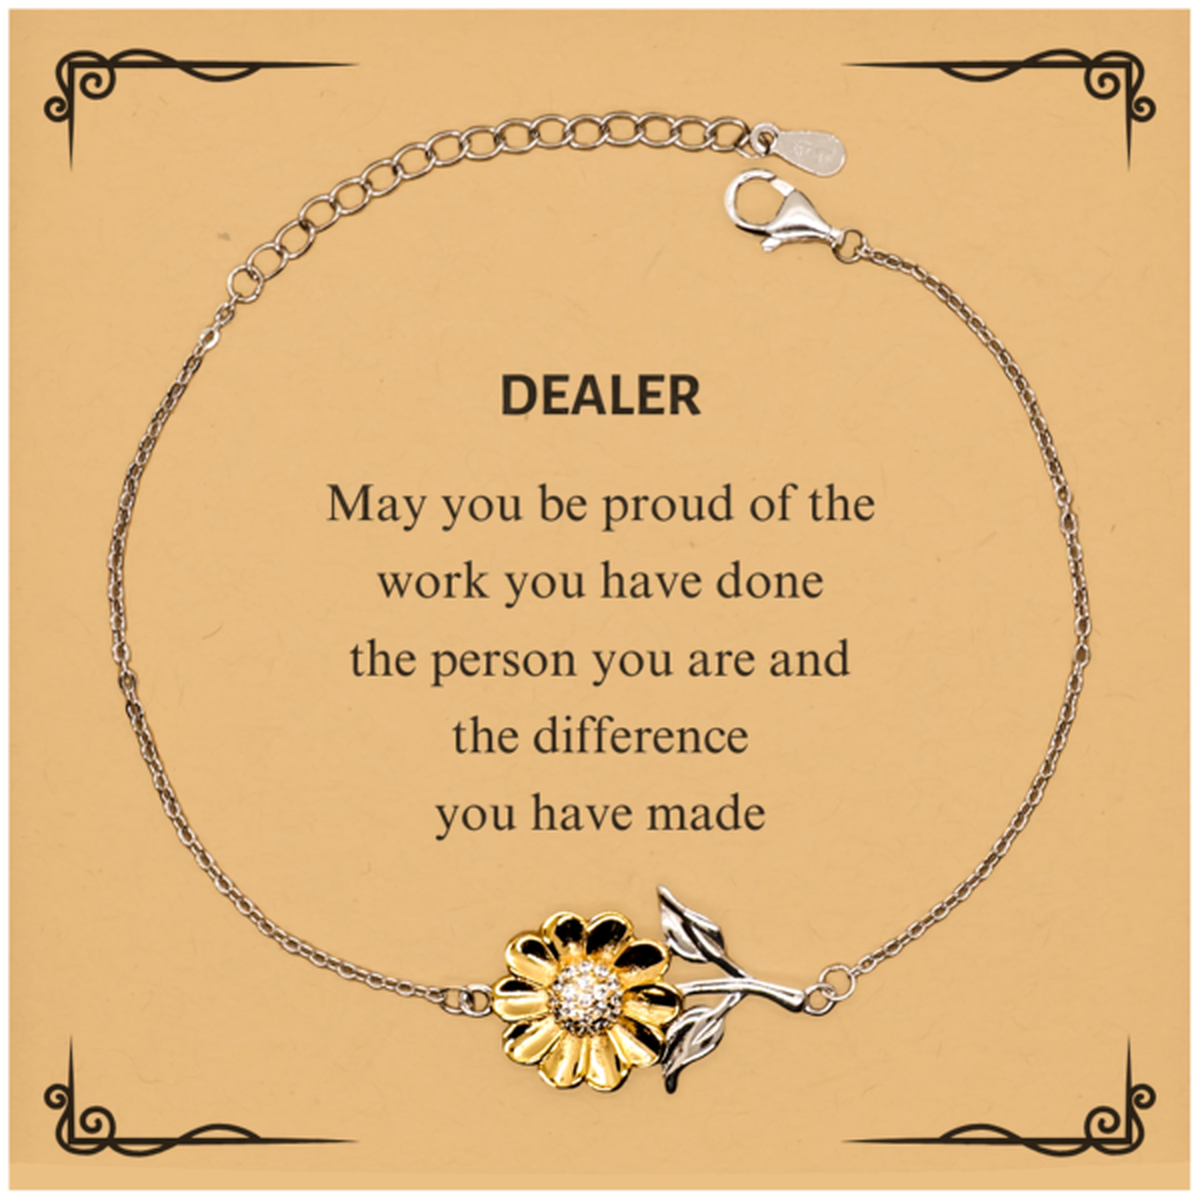 Dealer May you be proud of the work you have done, Retirement Dealer Sunflower Bracelet for Colleague Appreciation Gifts Amazing for Dealer